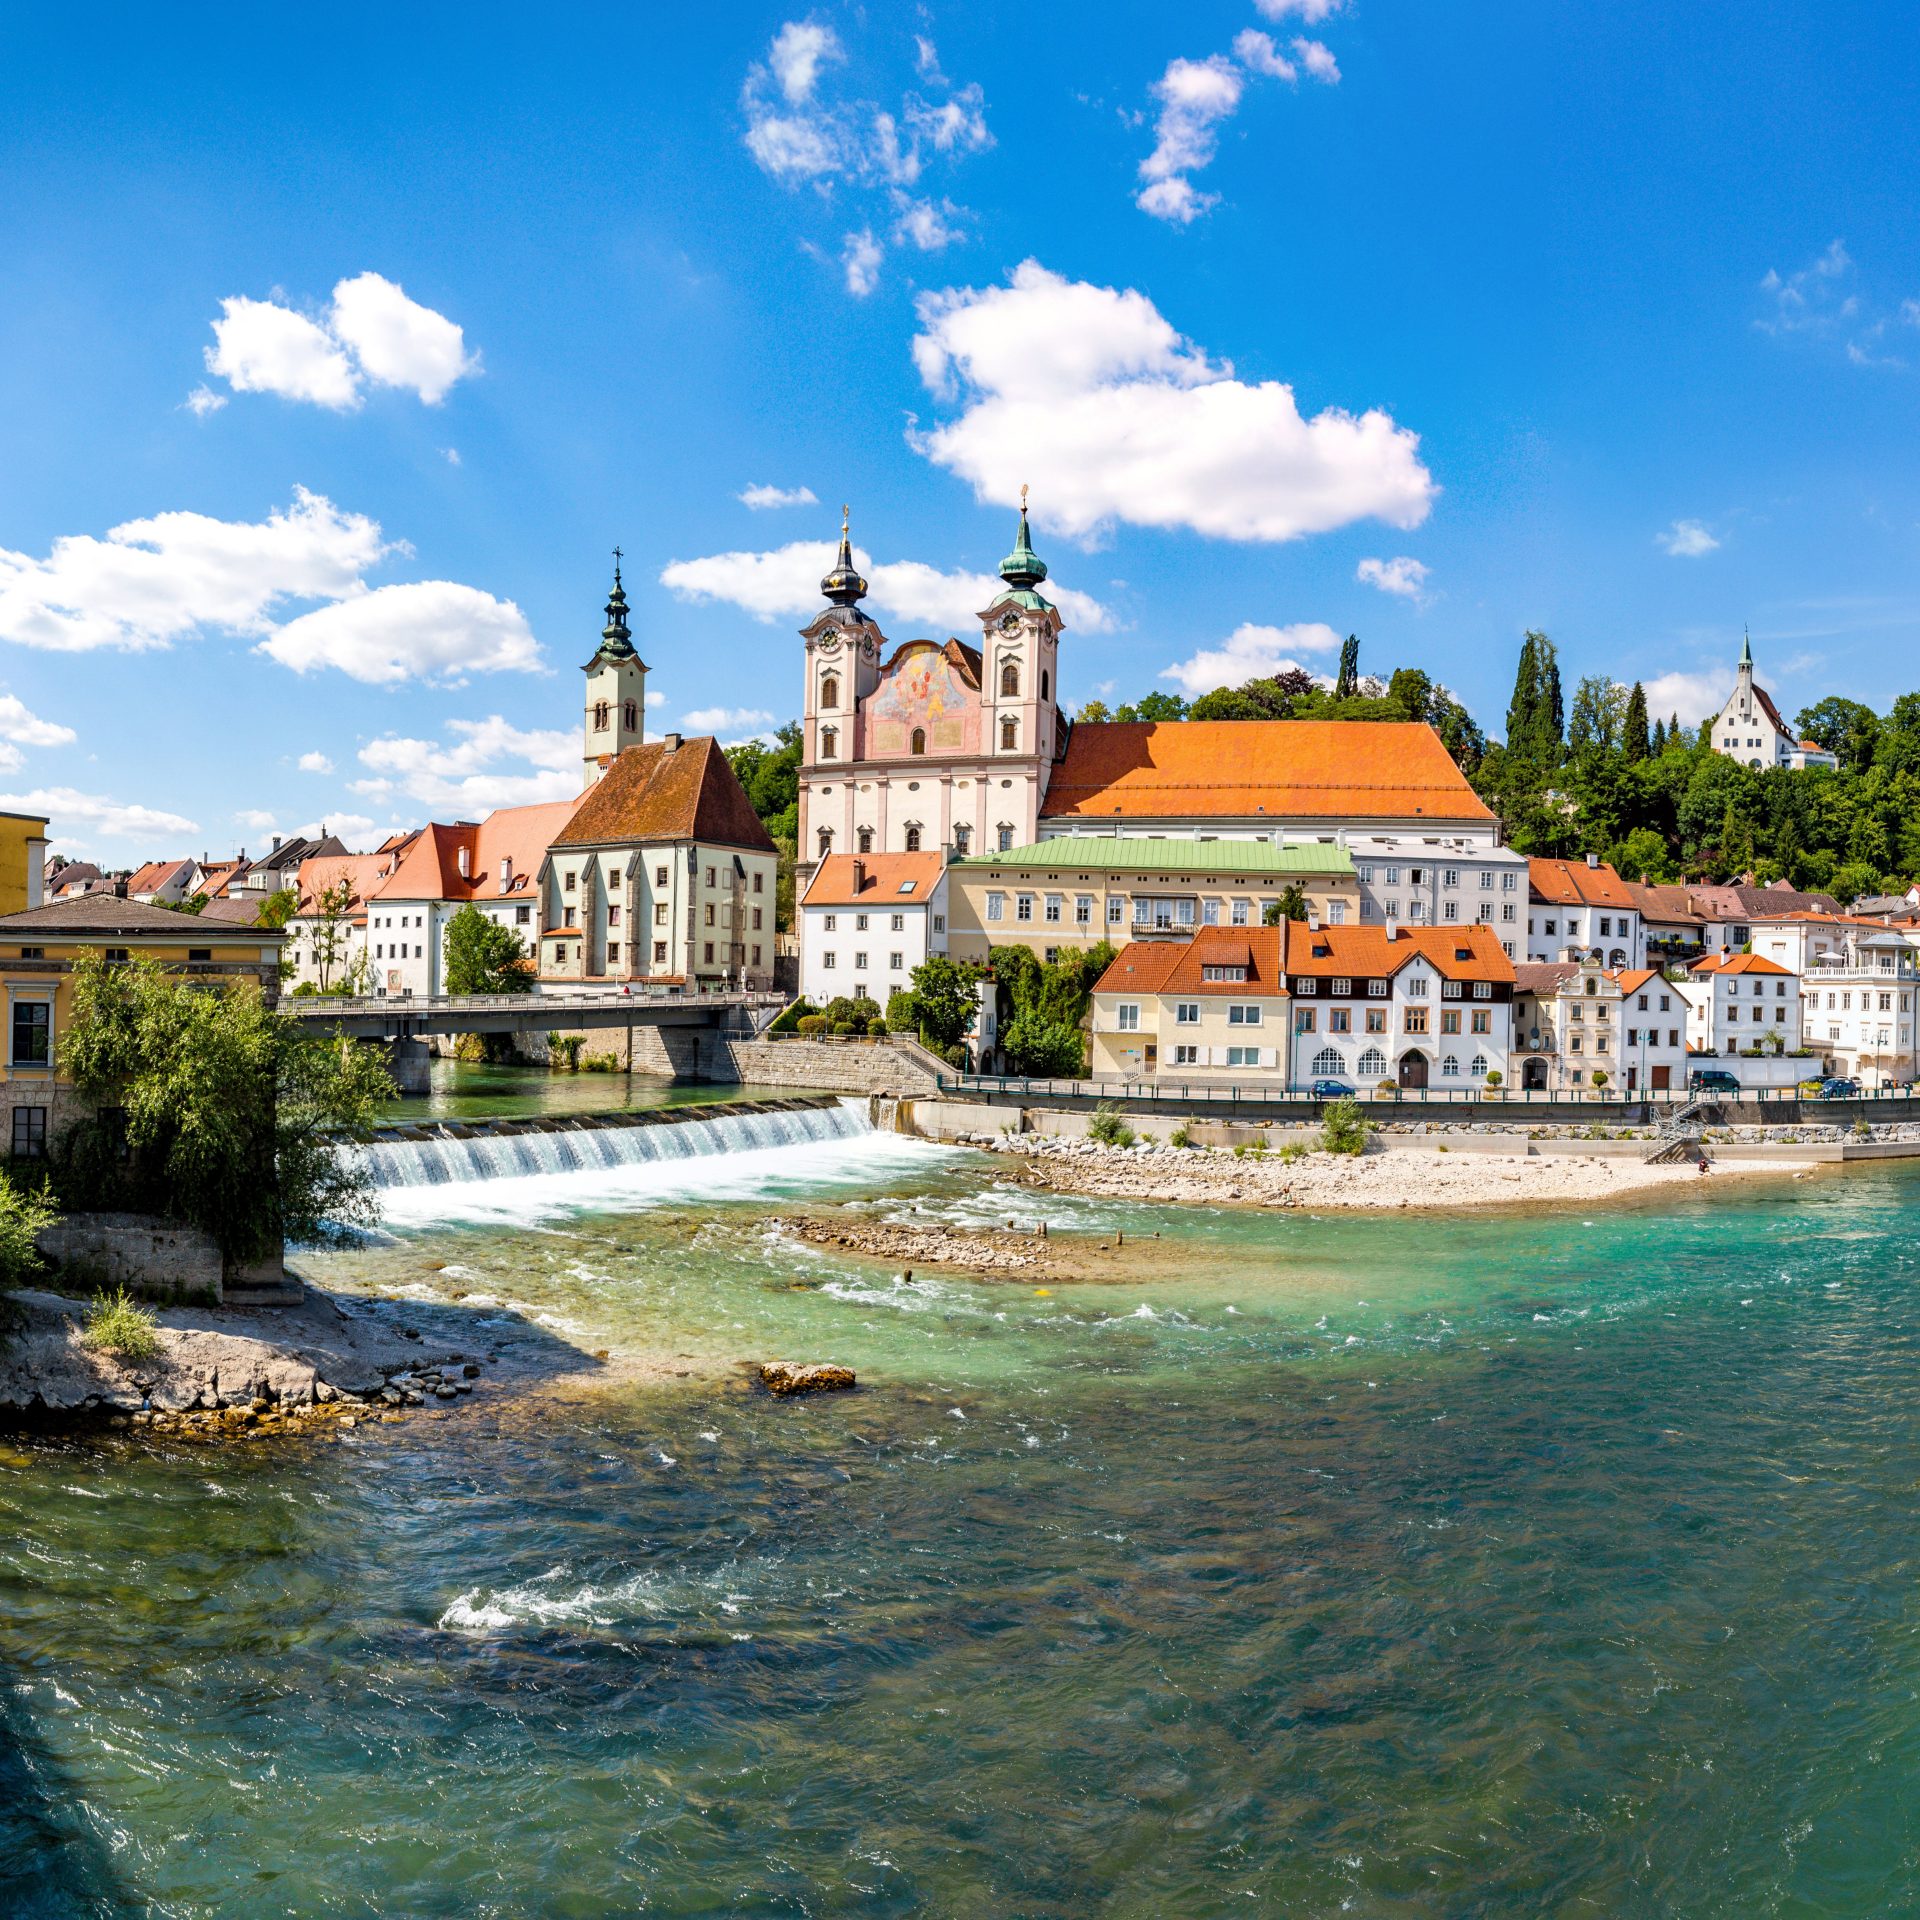 The image shows the city of Steyr.